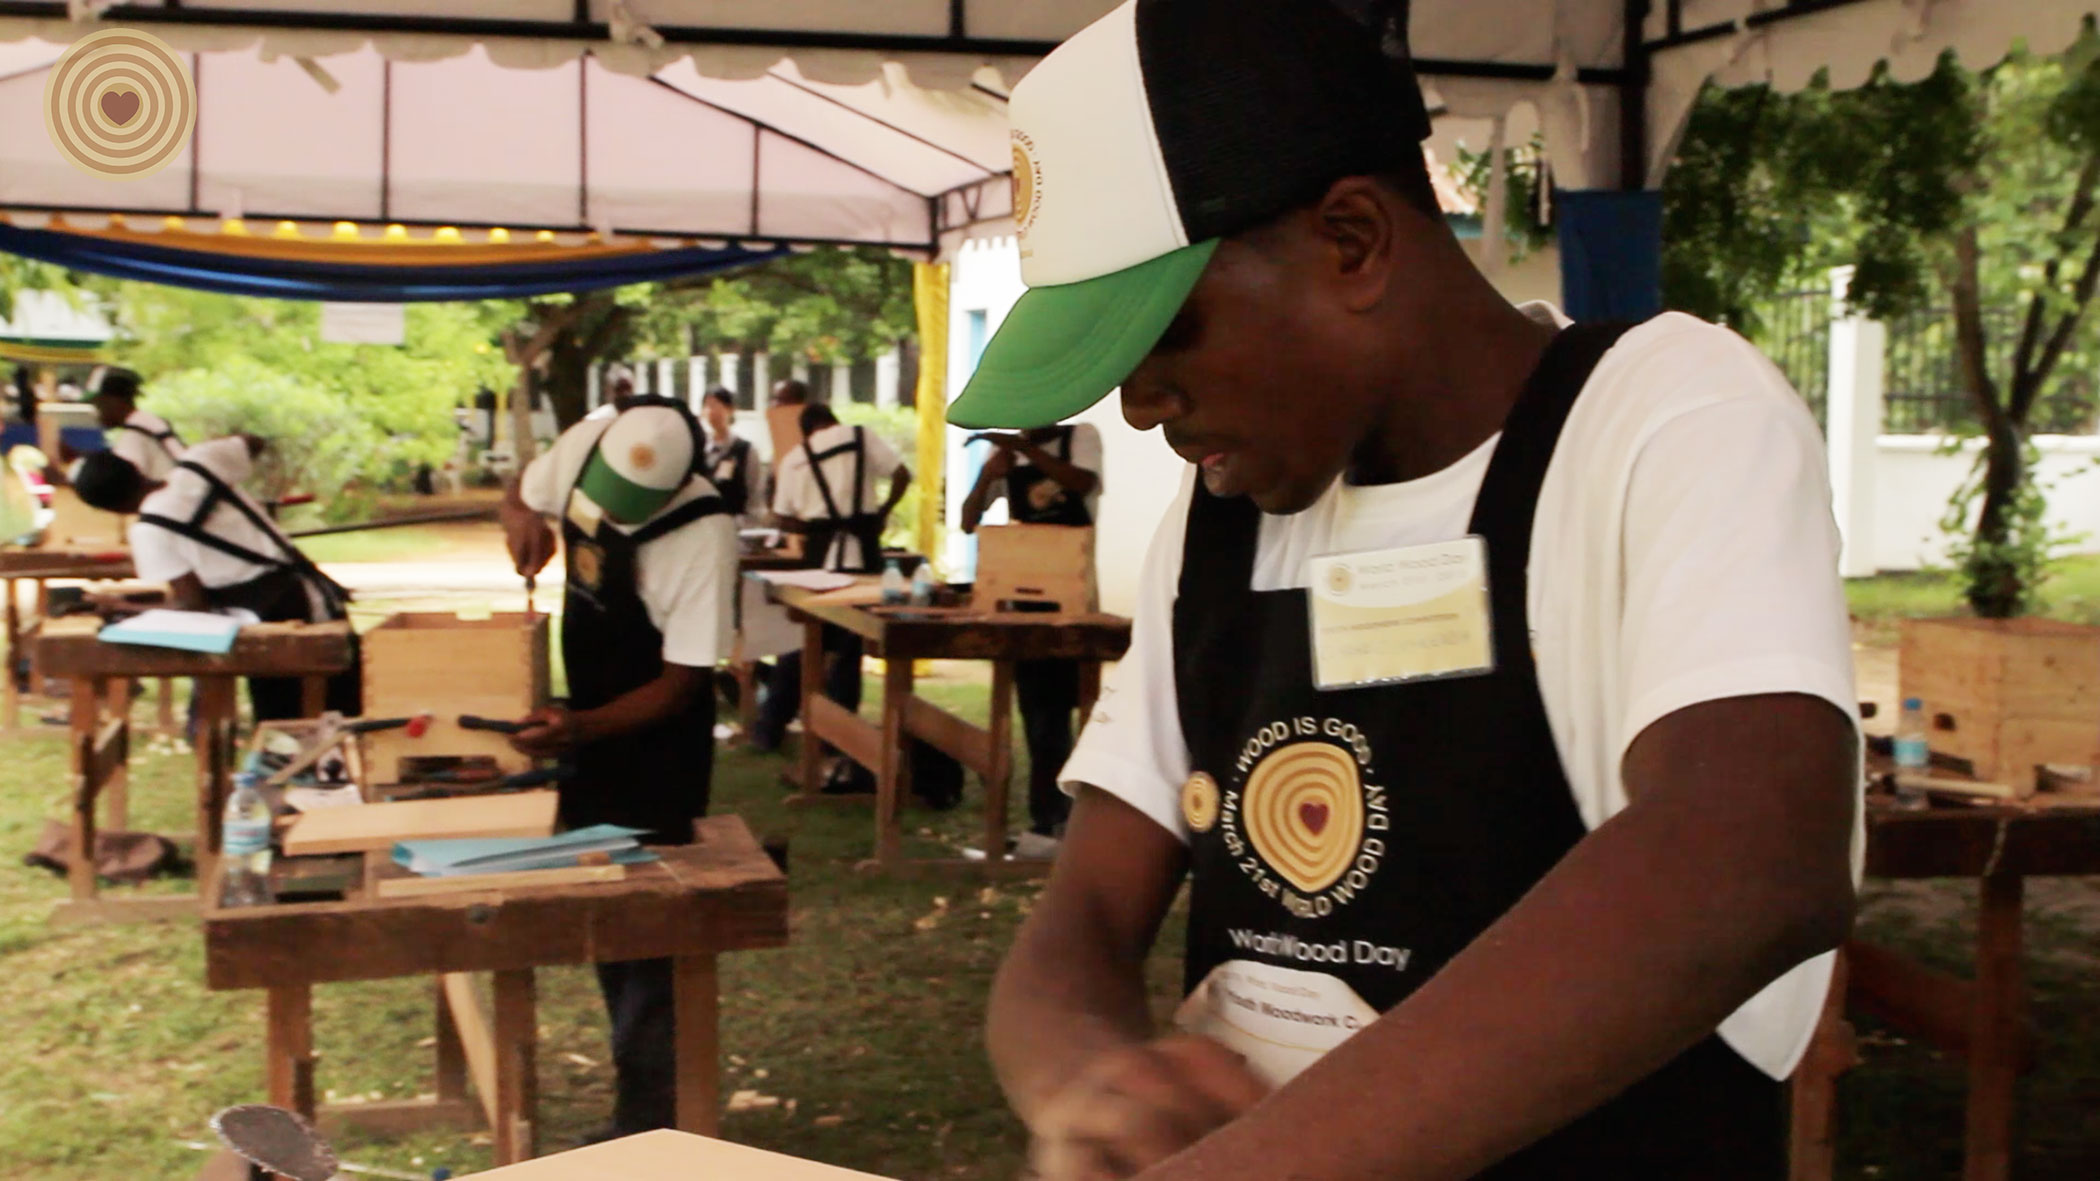 2013 World Wood Day, Youth Woodwork Competition